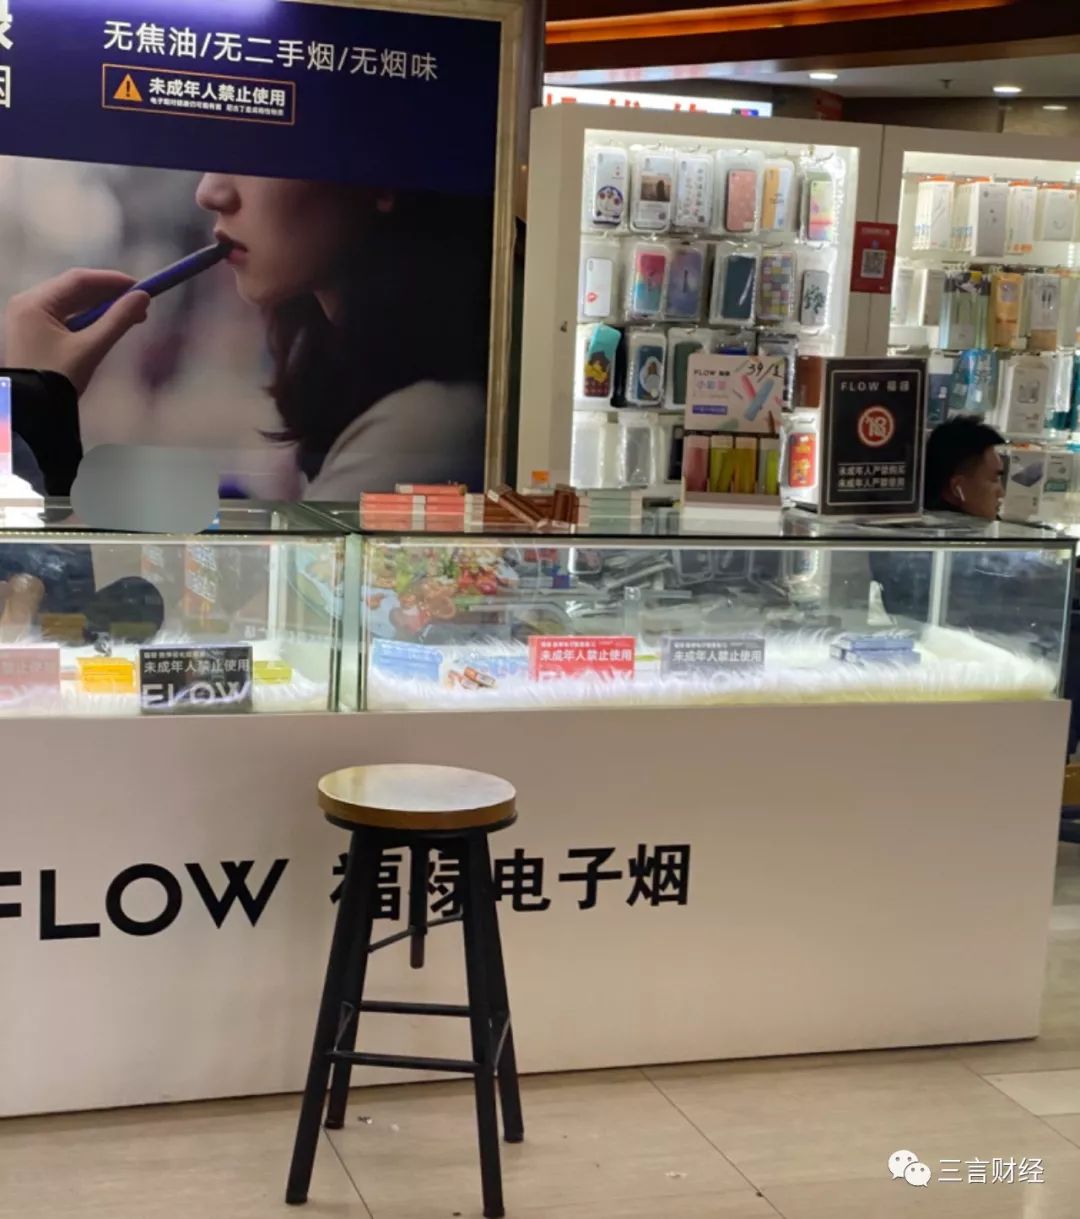 The current status of the electronic cigarette line survey: the store door can be a bird, plus WeChat can be packaged, there is a store ready to stop selling